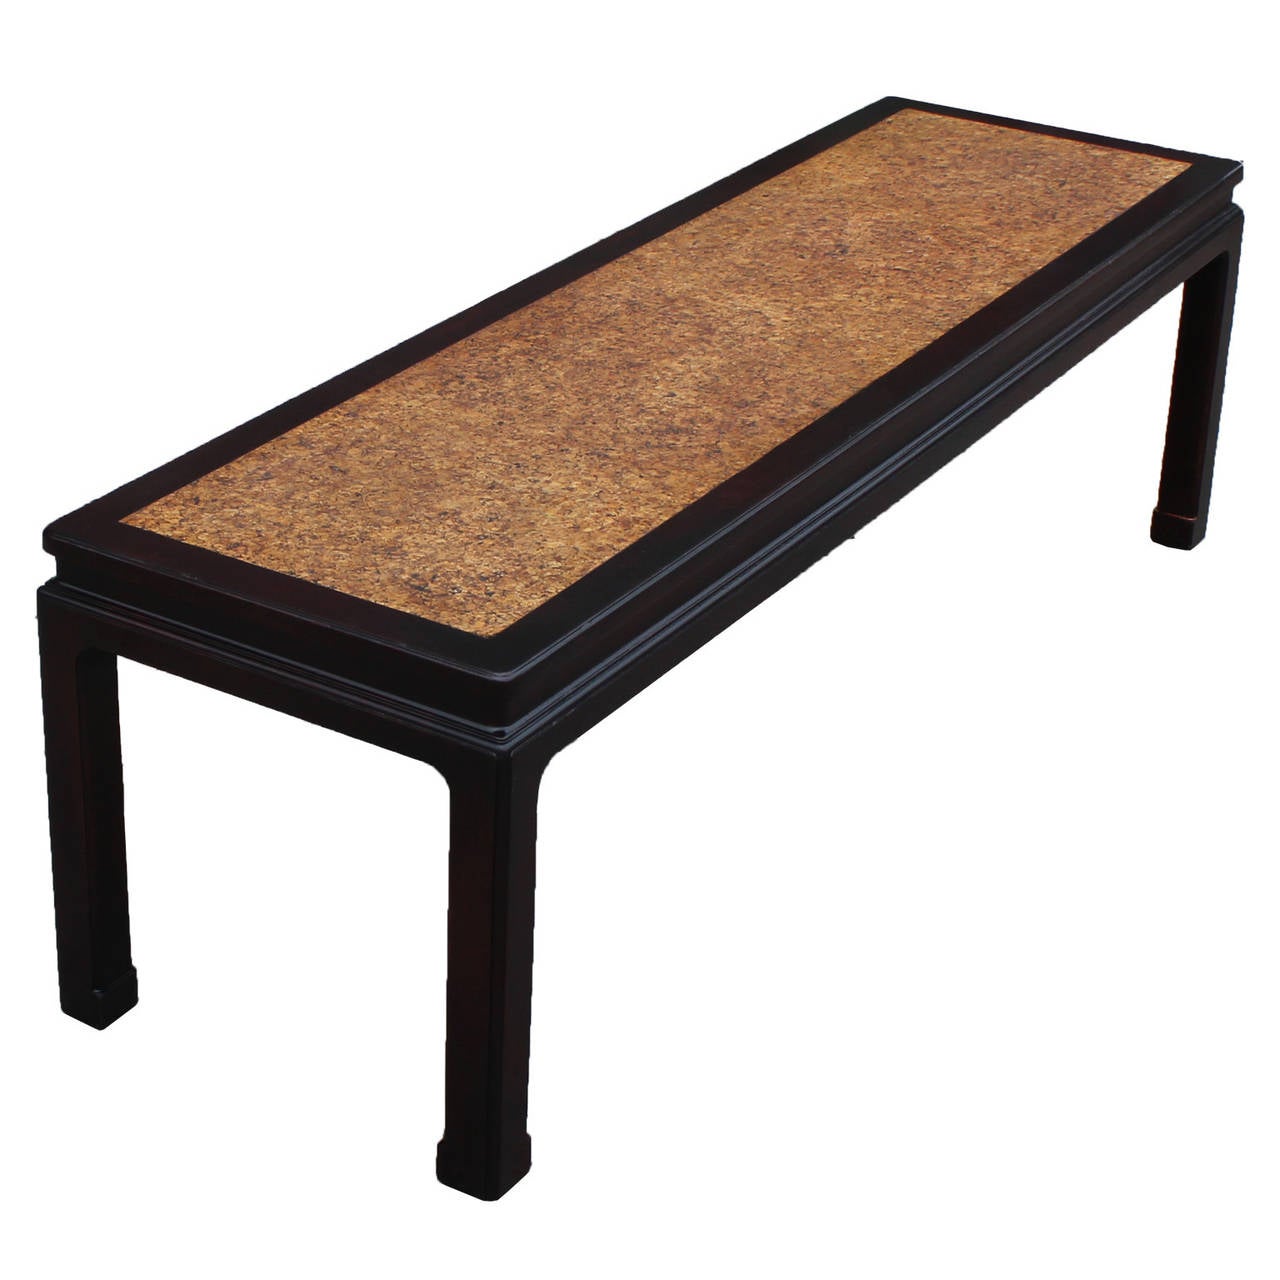 Beautiful Edward Wormley for Dunbar coffee table. Mahogany table is inlaid with a cork top. Stunning detailing make this the perfect transitional piece. Green rectangular label attached.